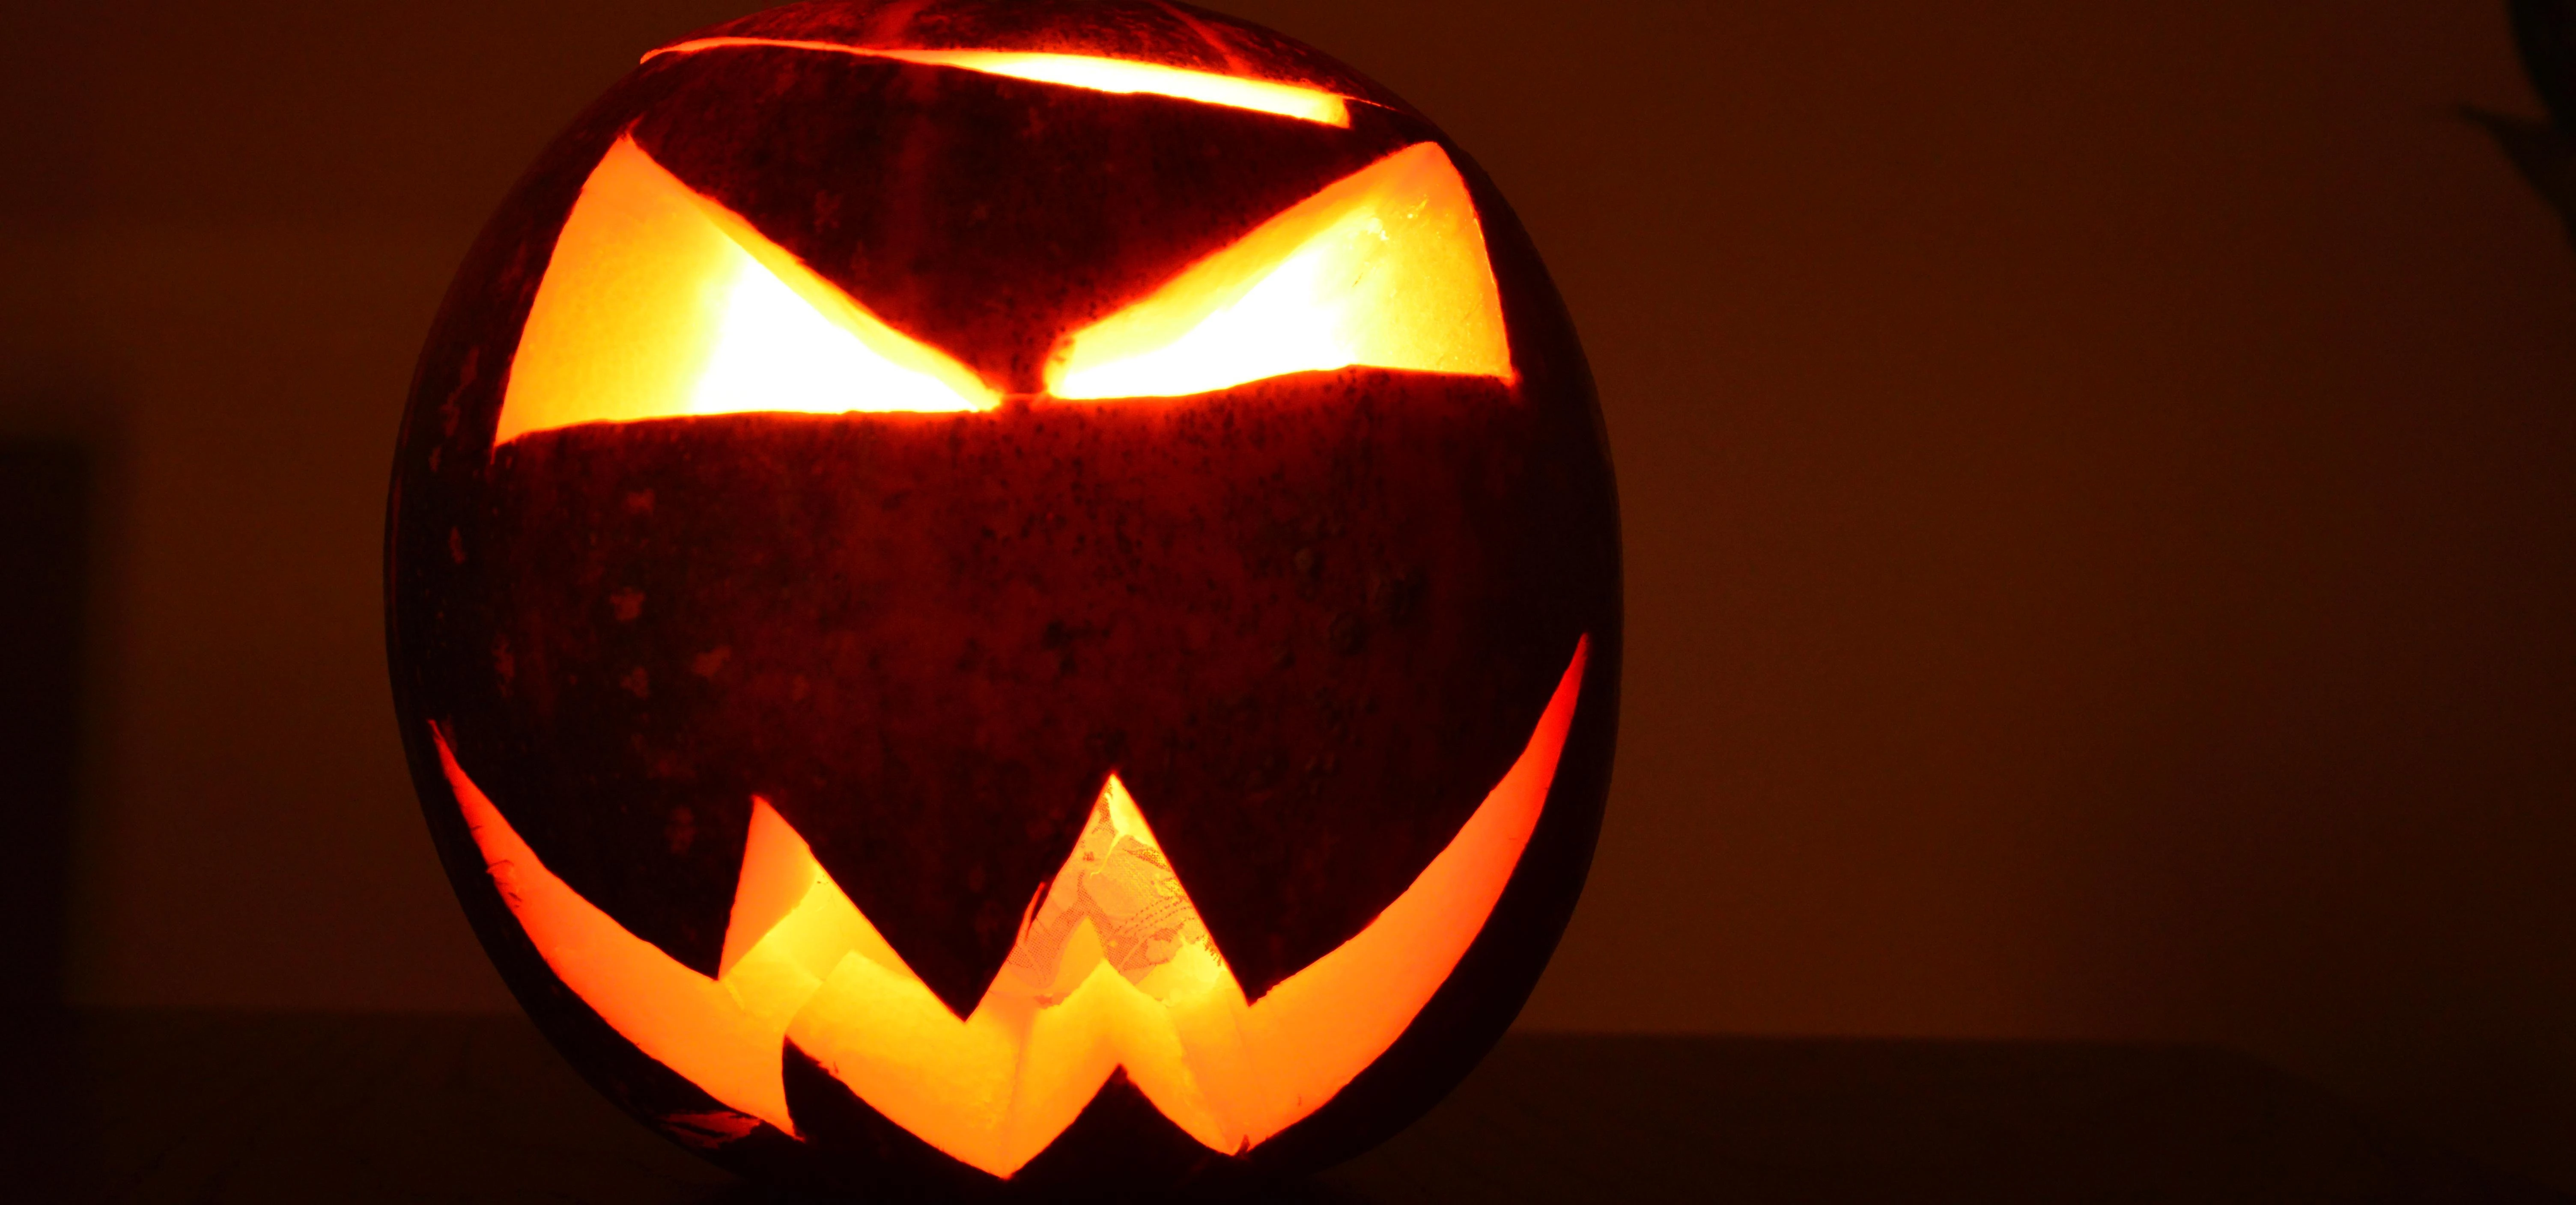 - Halloween ticket sales up by over a third -